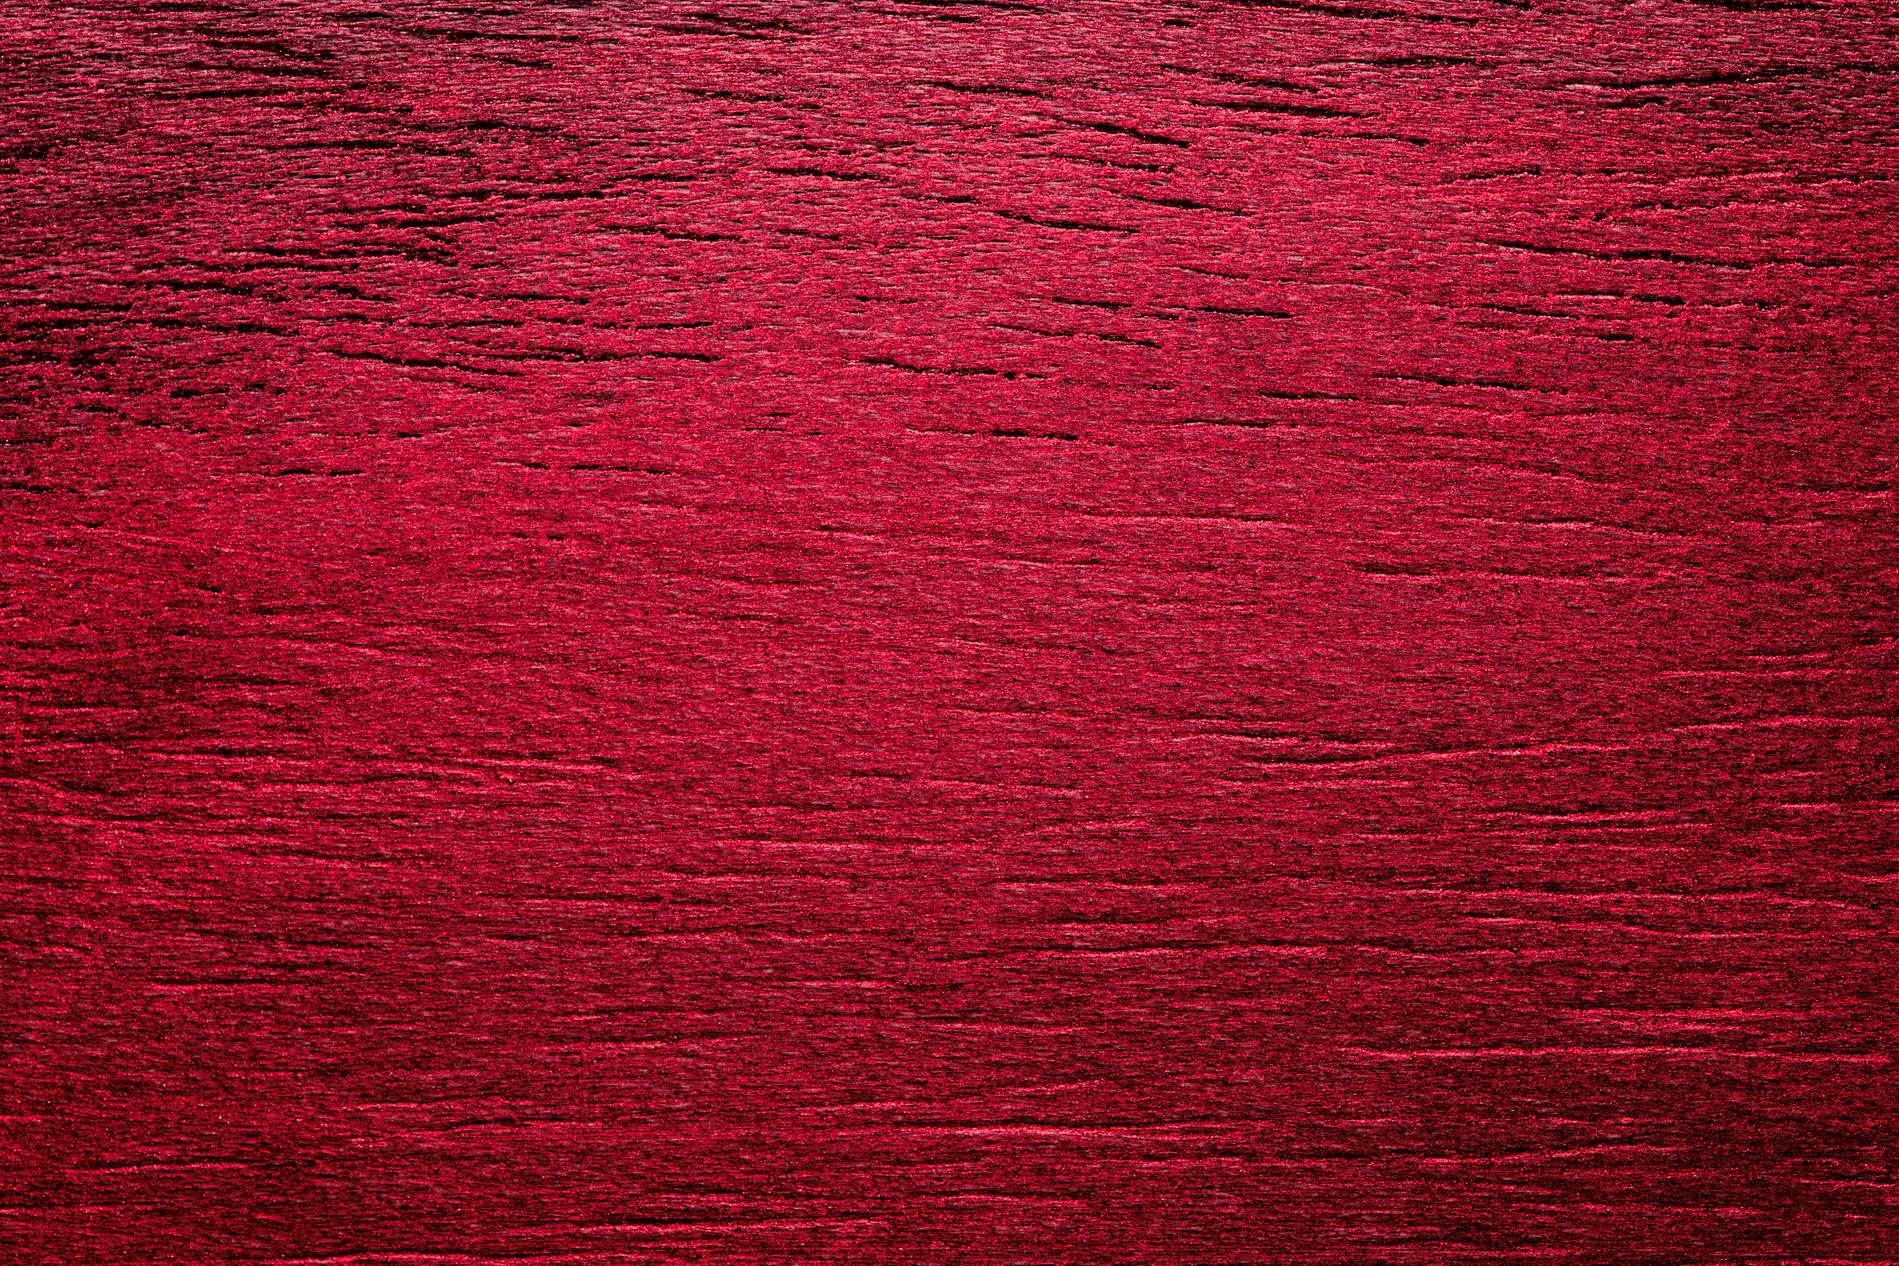 Vintage Red Wall Texture Background PhotoHDx